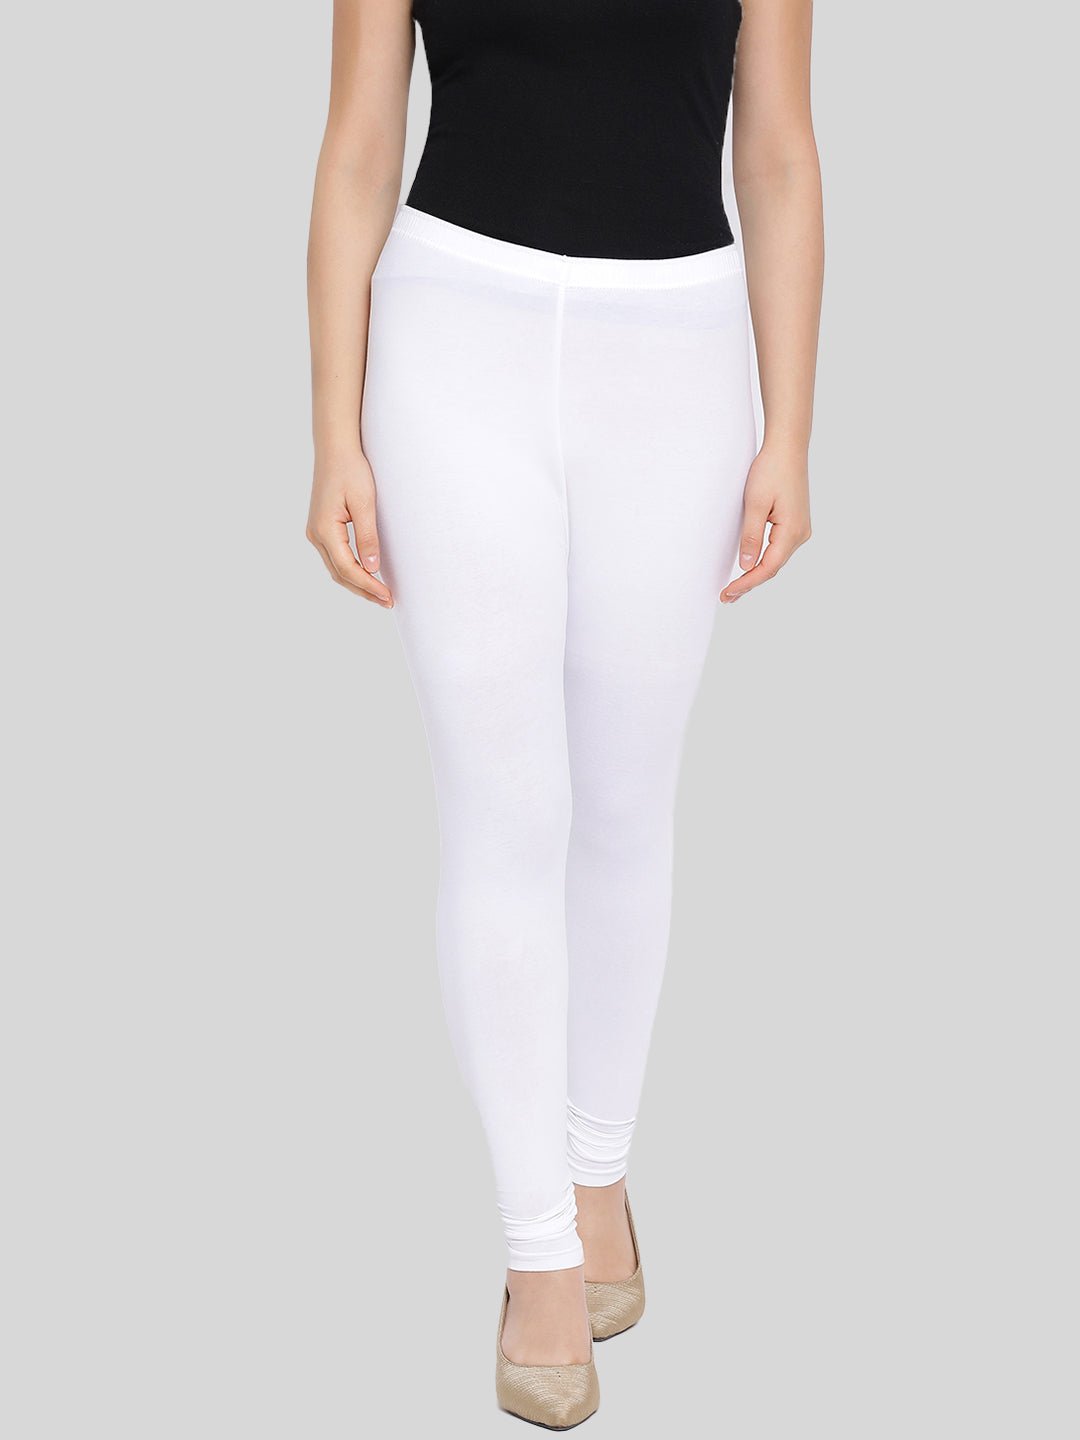 1% OFF on Lux Lyra White Woolen Legging - Set Of 3 on Snapdeal |  PaisaWapas.com